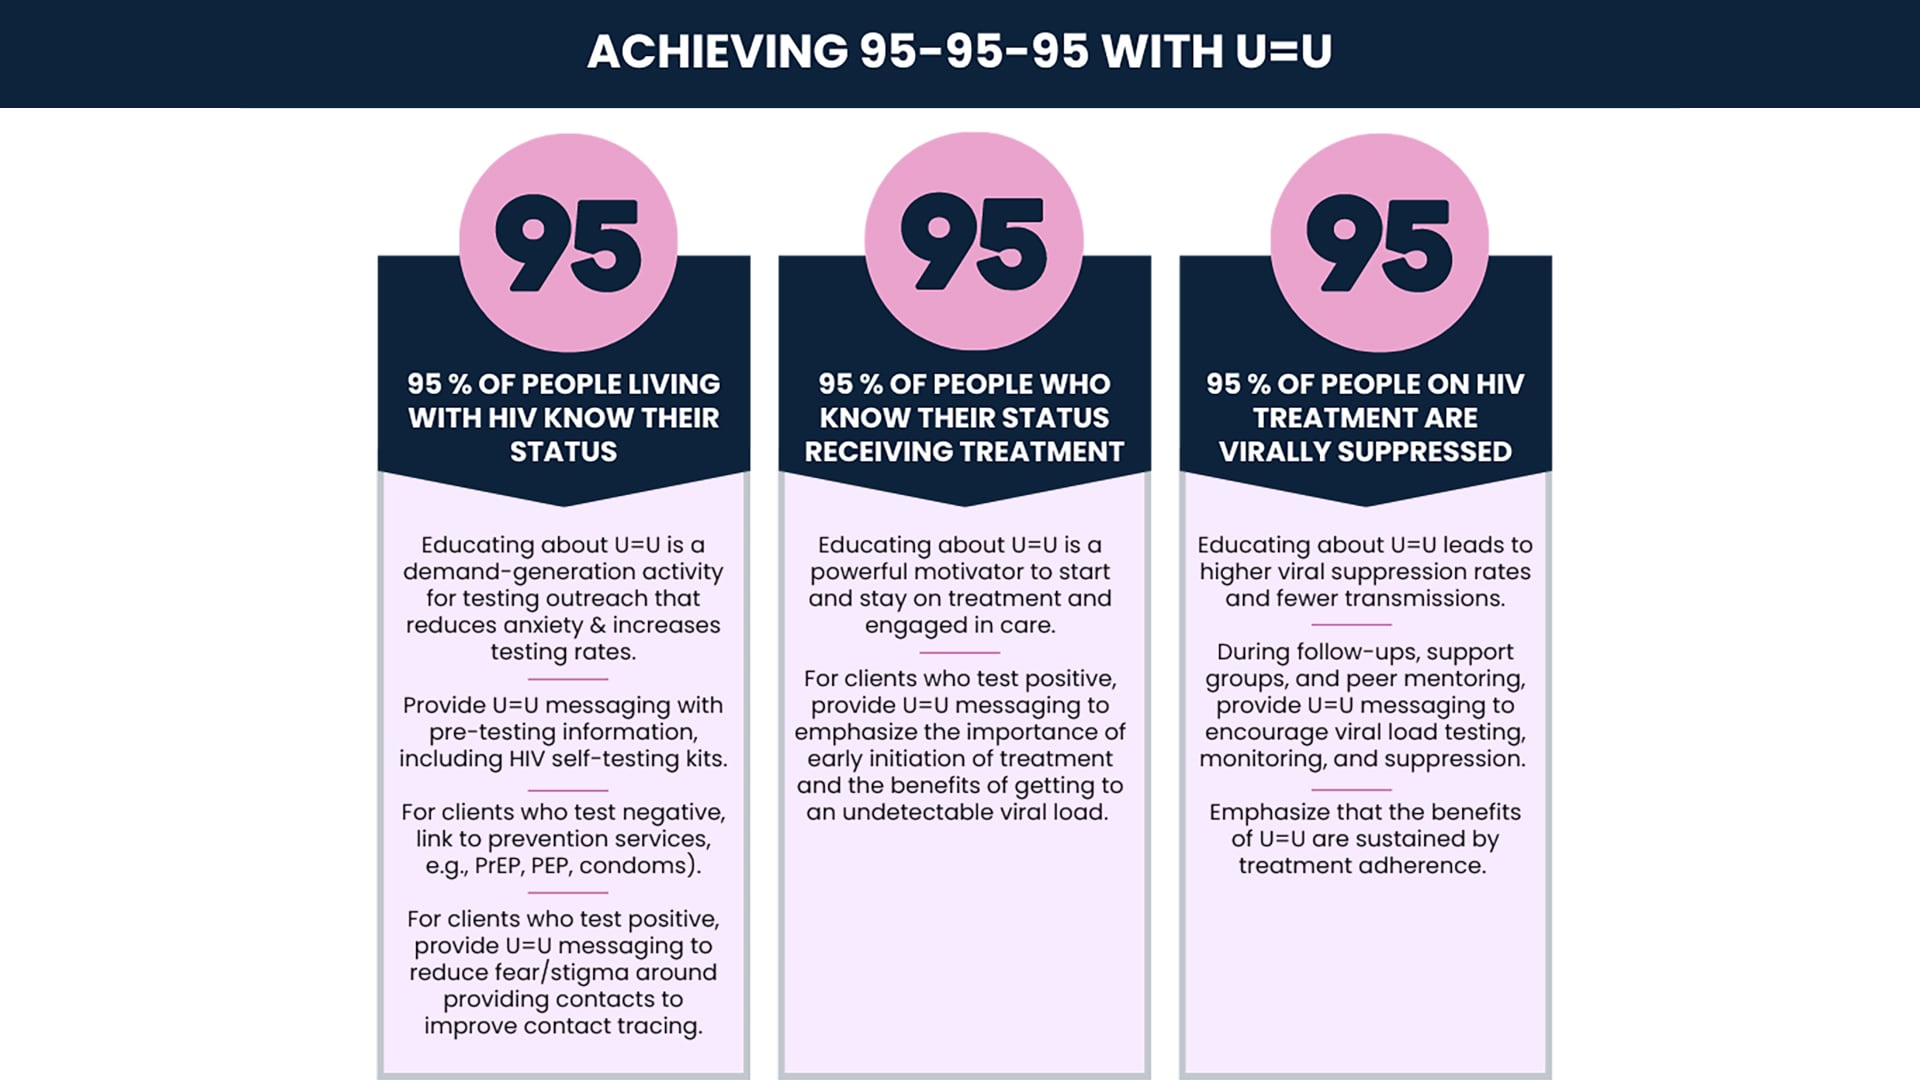 Infographic showing how U=U can help to achieve 95-95-95 targets.